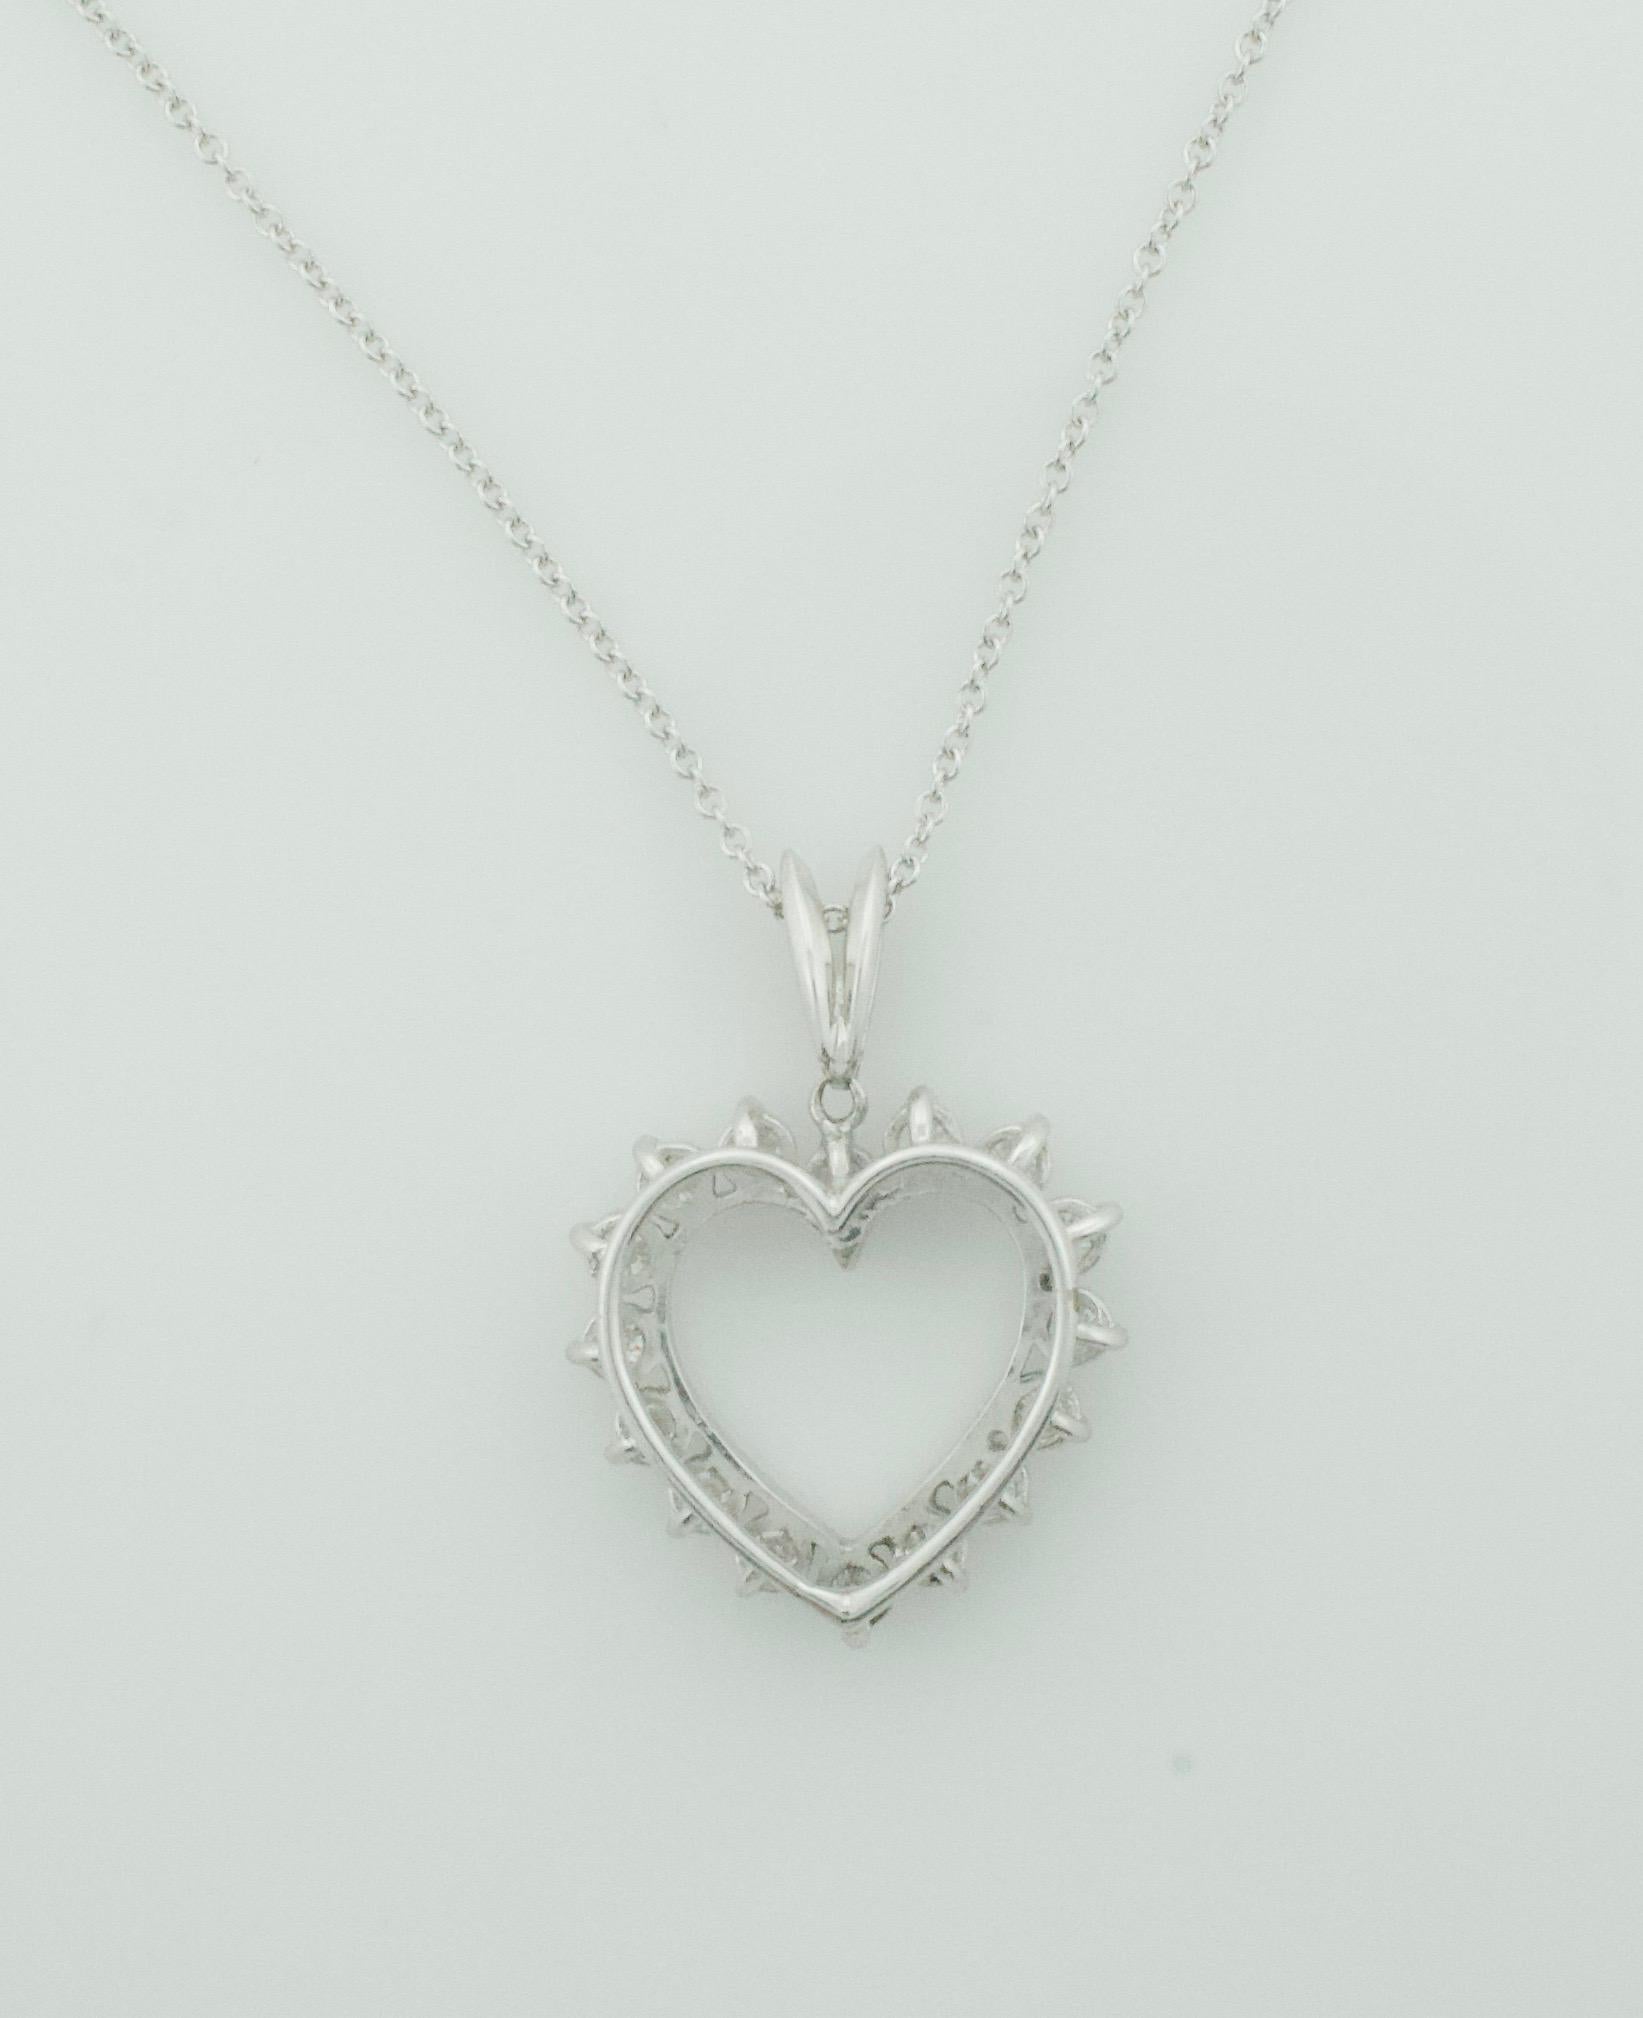 Women's or Men's Thee Classic Diamond Heart Pendant on Chain 1.75 Carats Circa 1960's For Sale